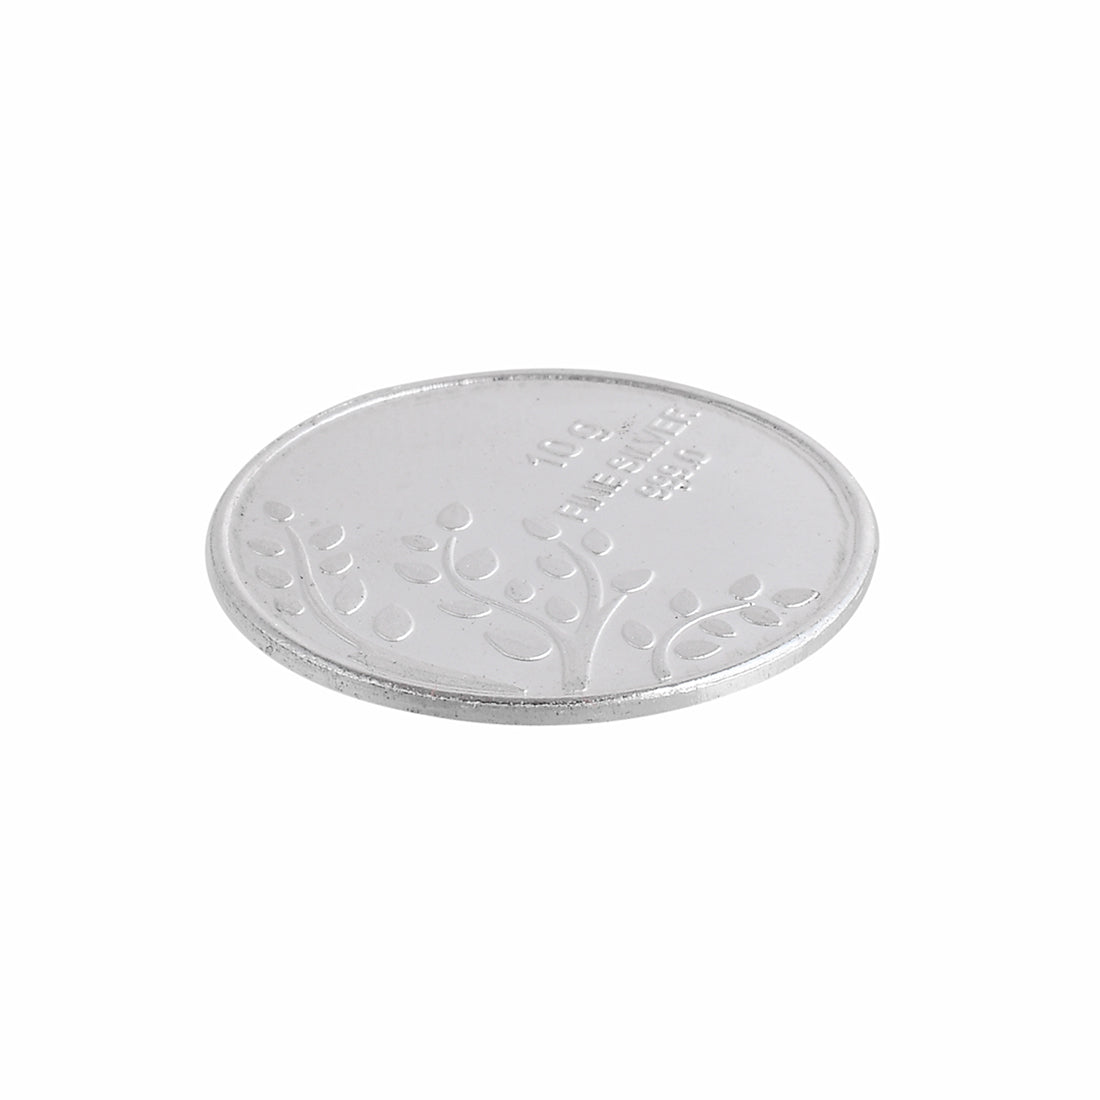 925 Sterling Silver Leaves 10 Grams Coin - Voylla